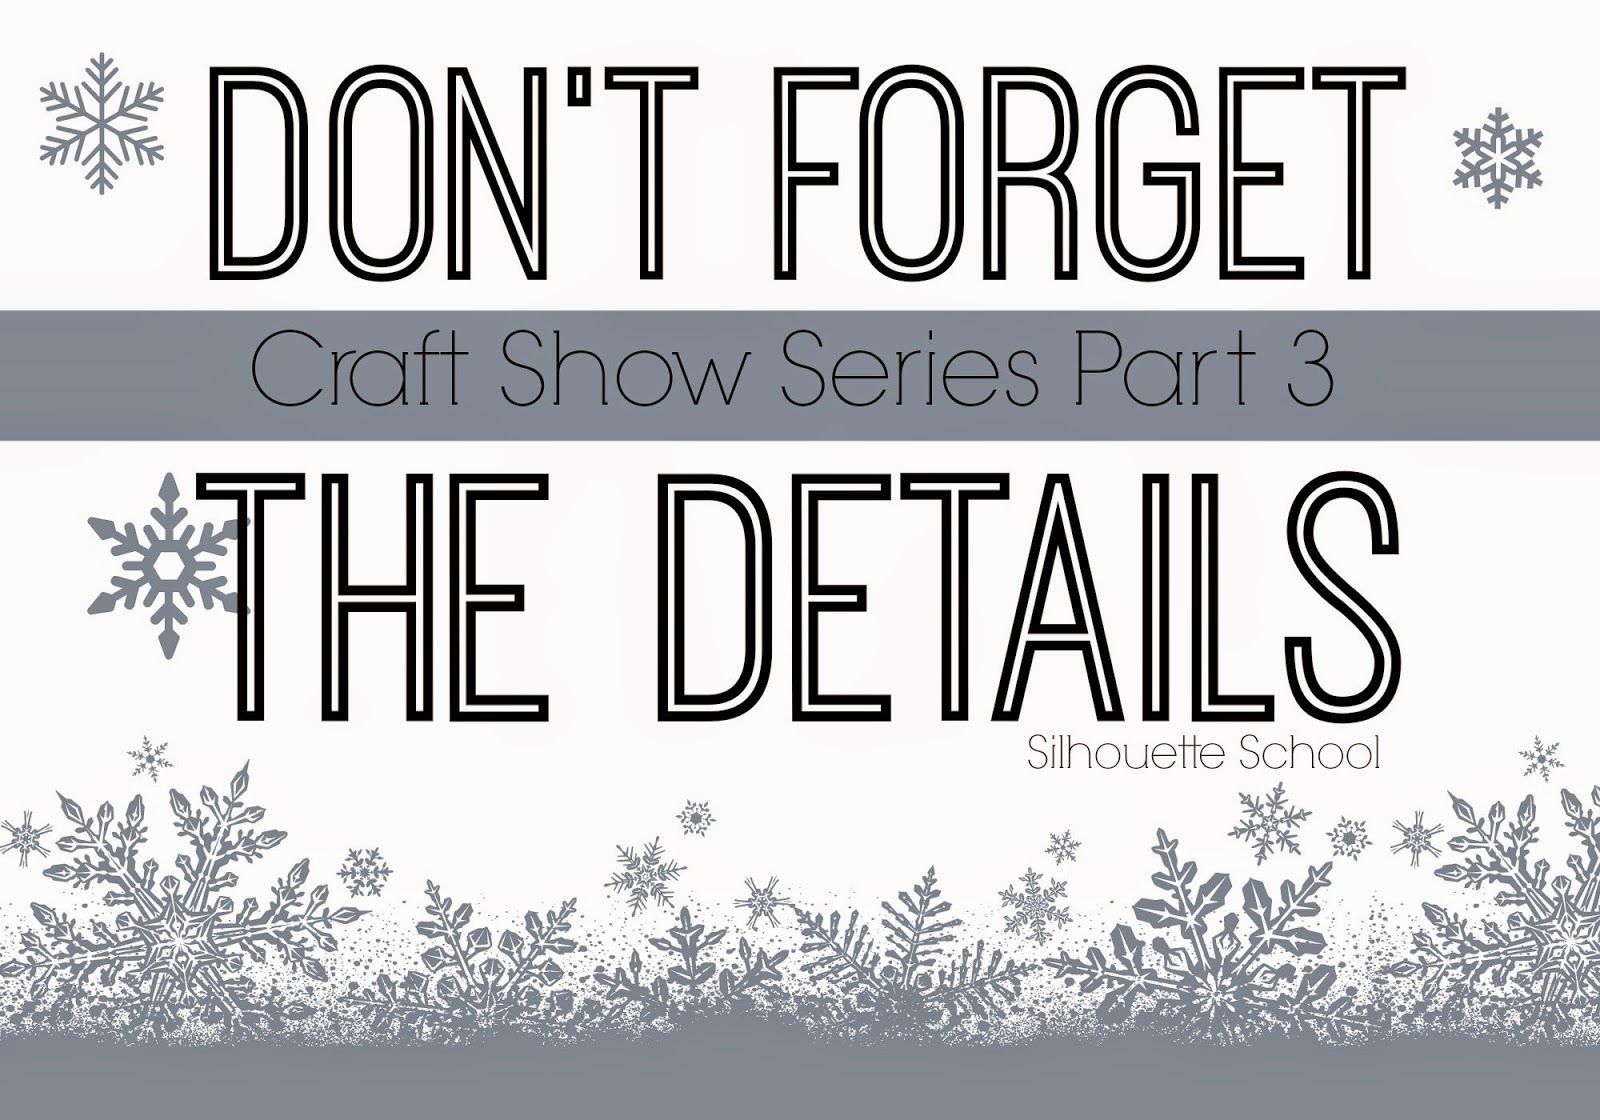 Craft Show Series Part 3: Don't Forget the Details -   24 school crafts display
 ideas